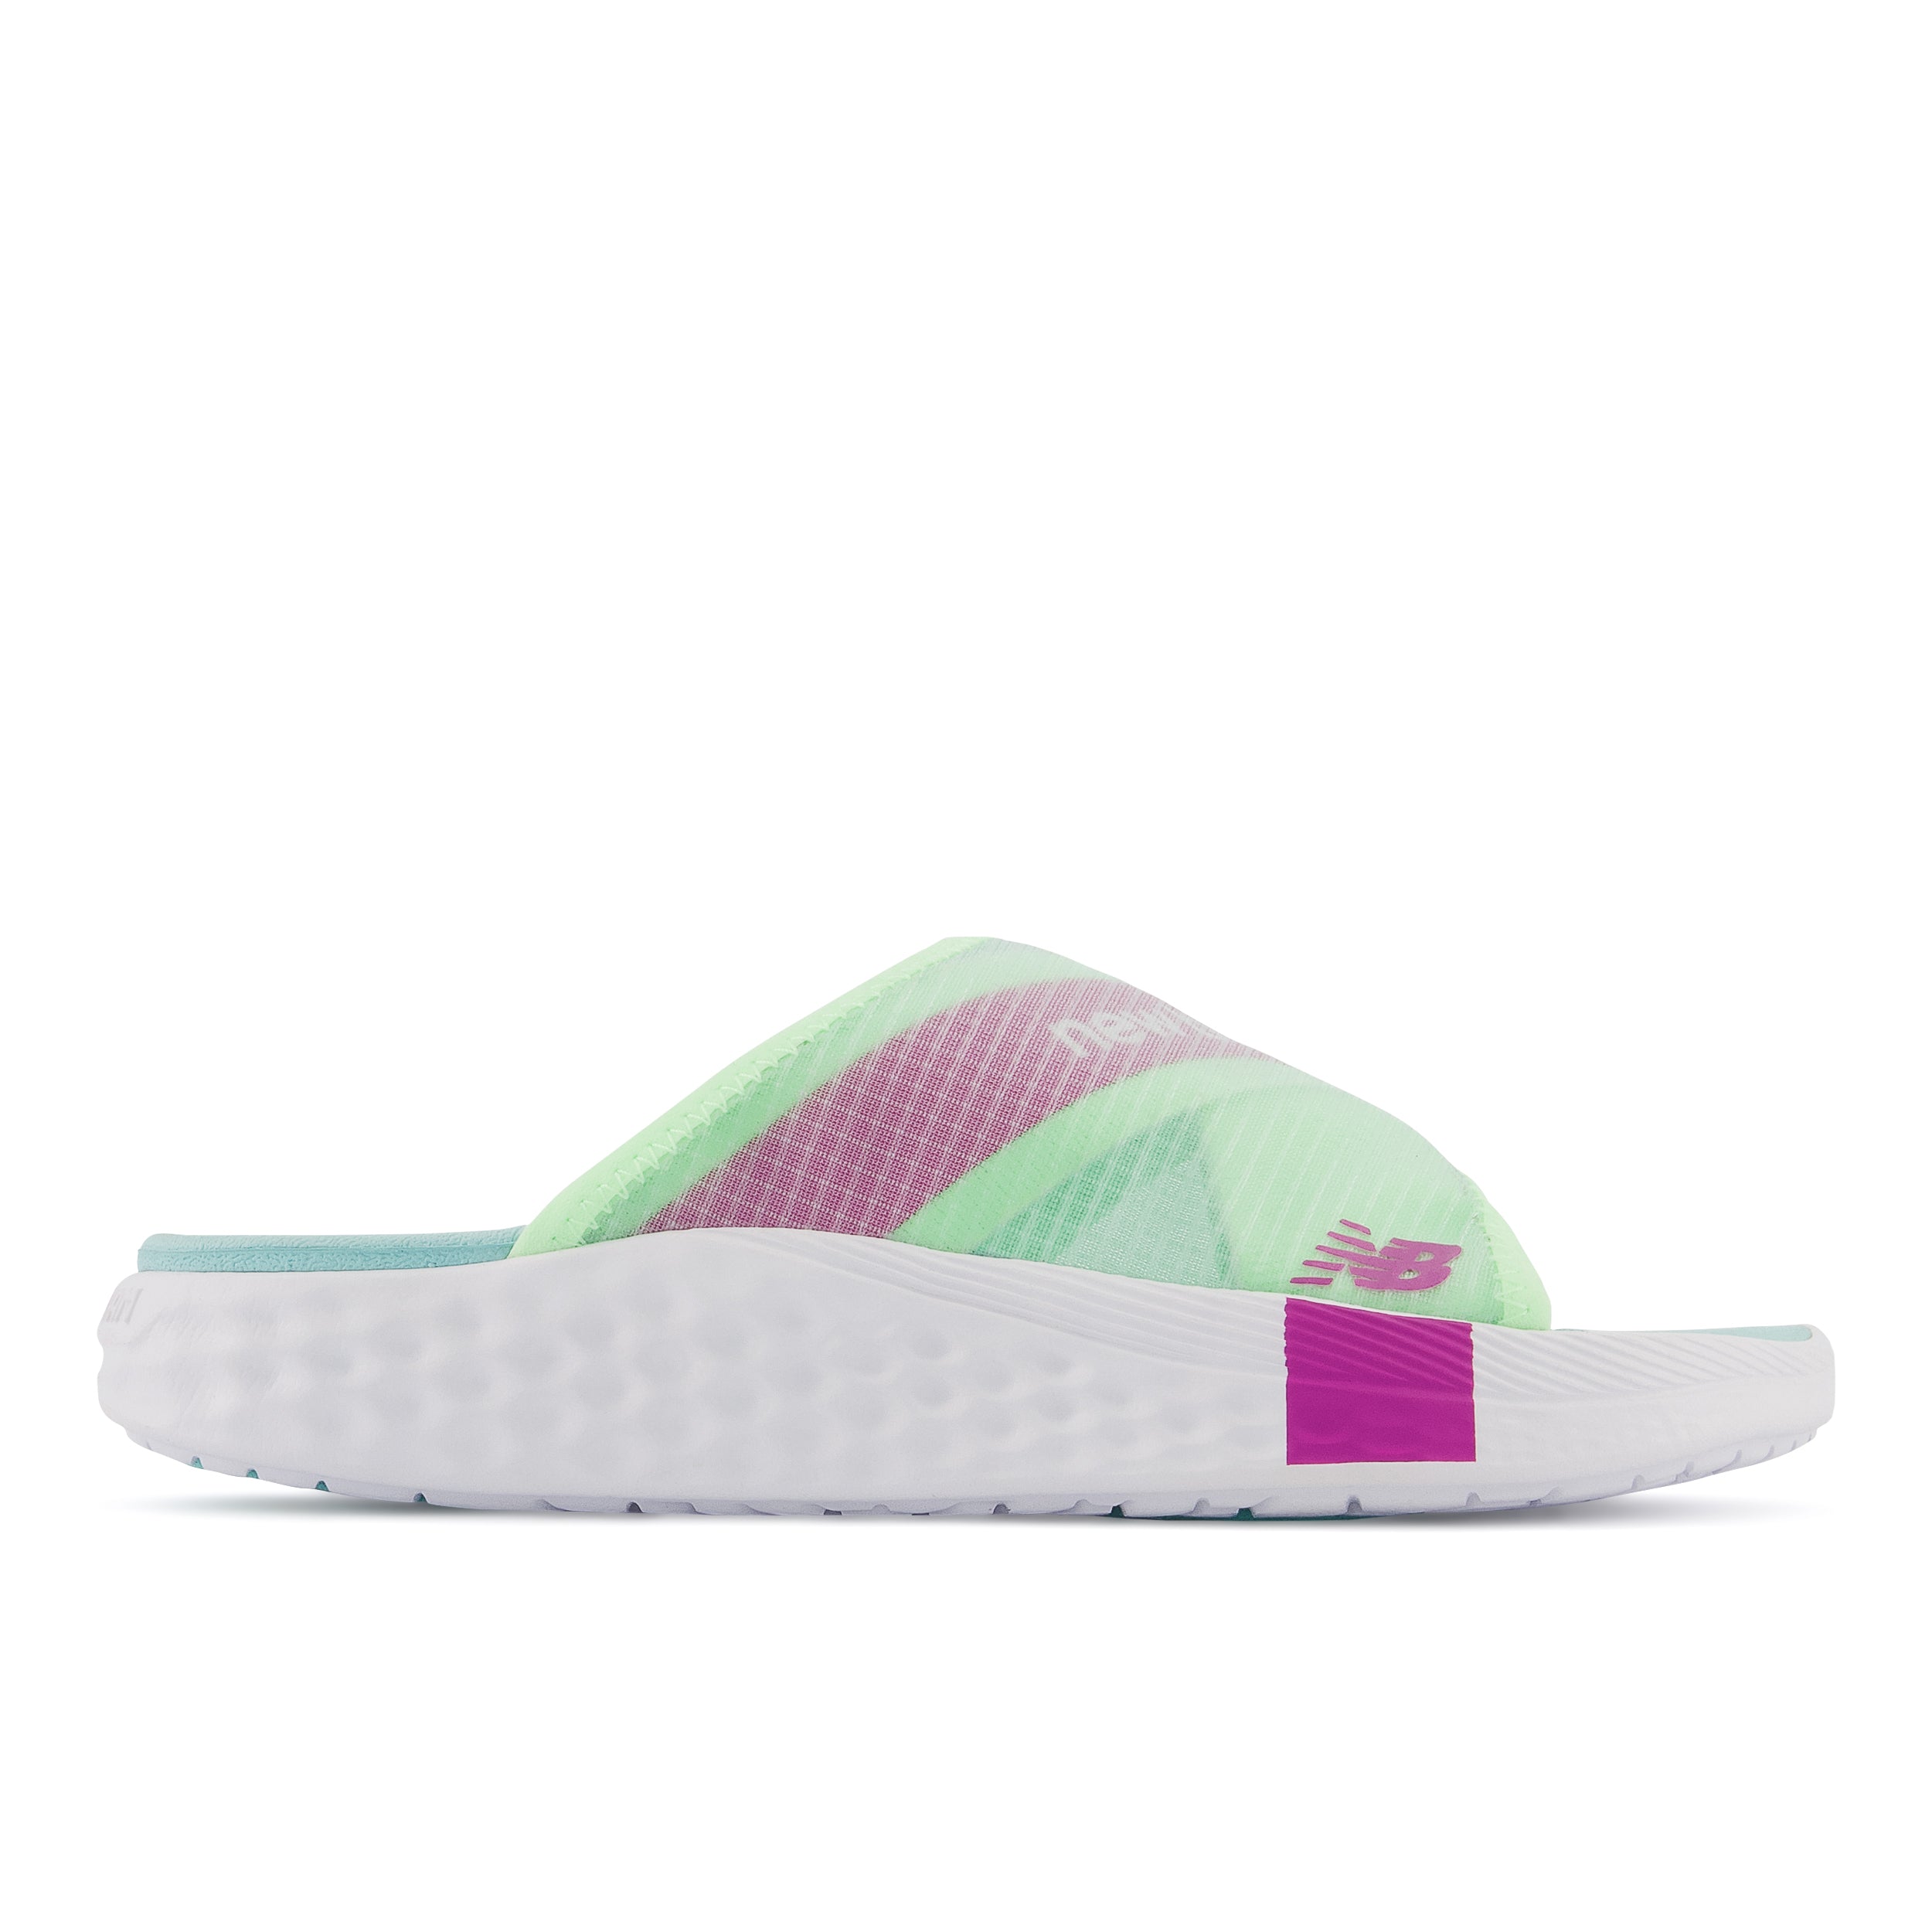 Women's New Balance 360 Color: White with Vibrant Spring and Magenta Pop